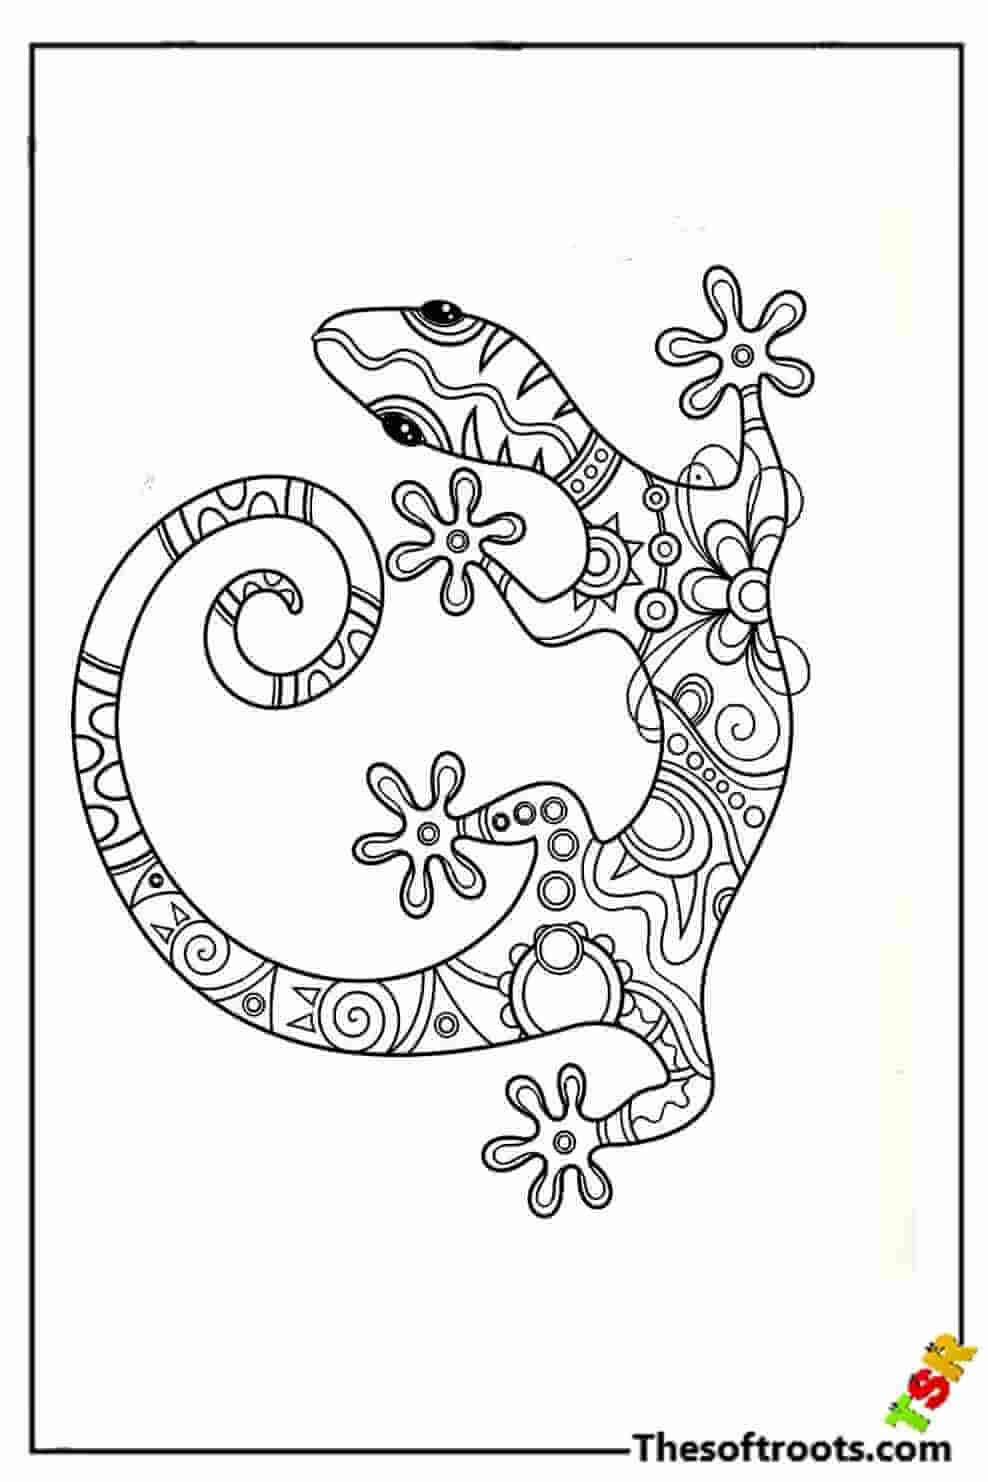 Beautifully Patterned Lizard coloring pages